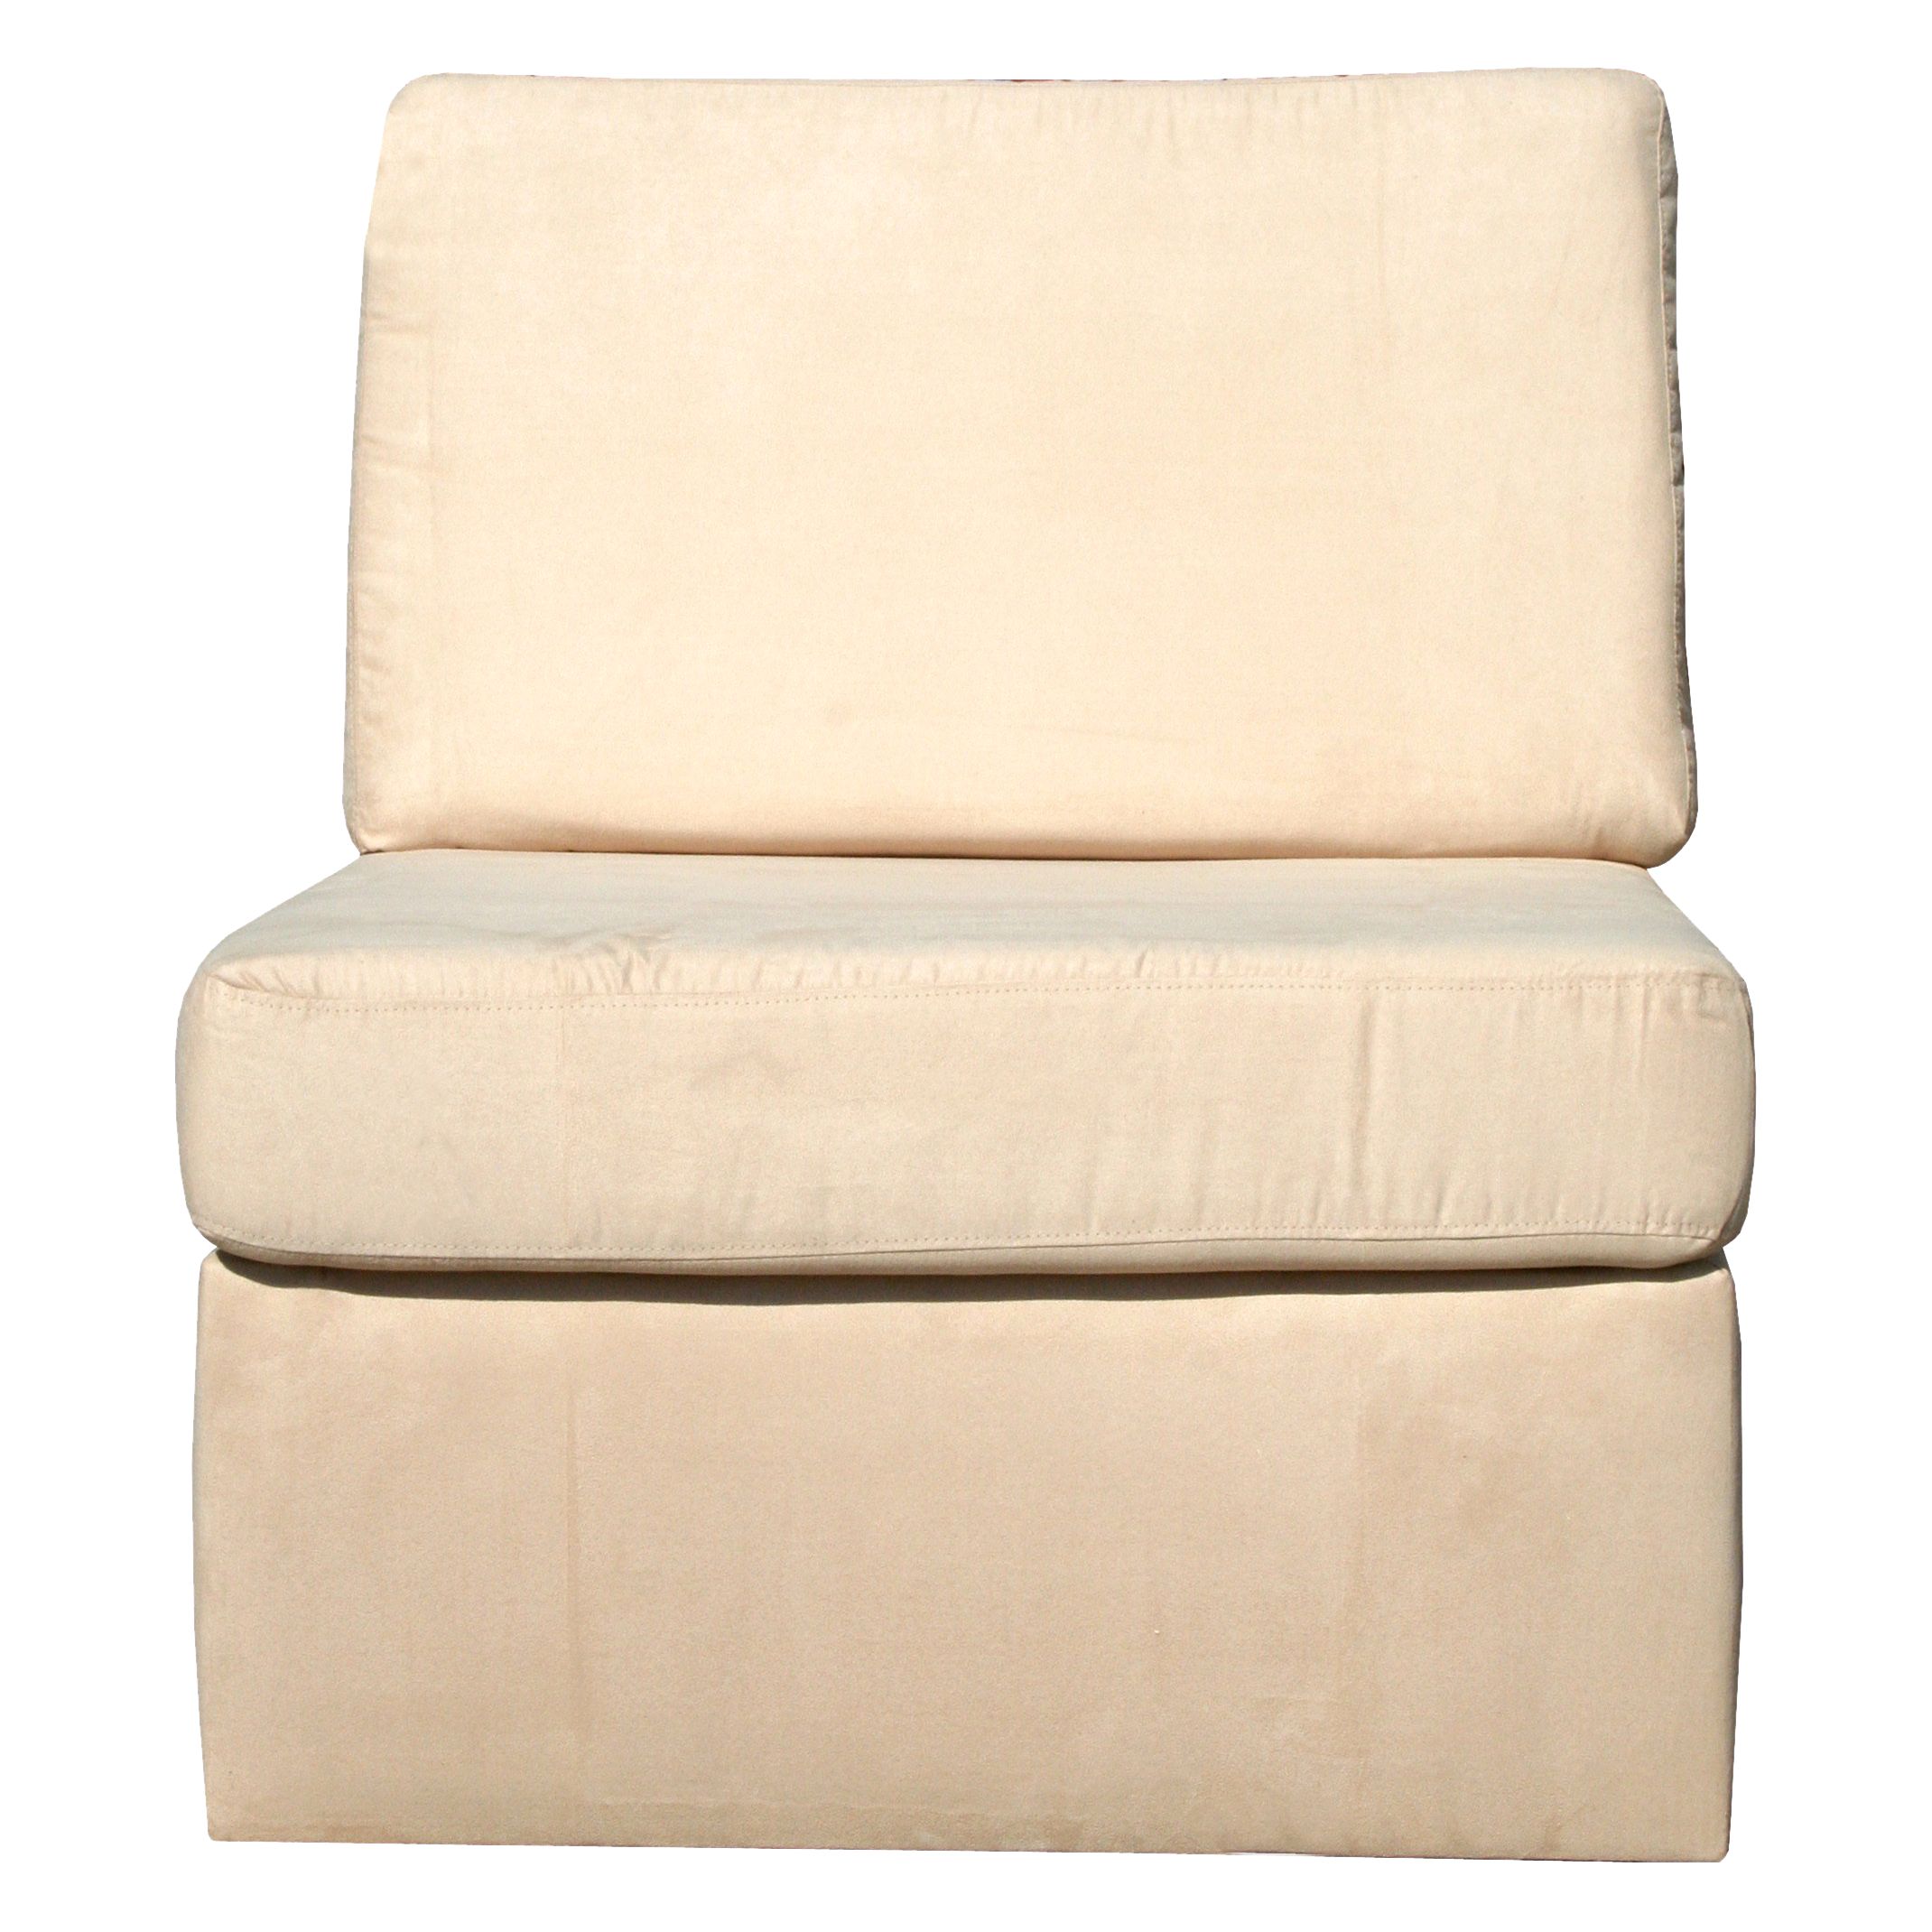 Barney Chair Bed, Beige